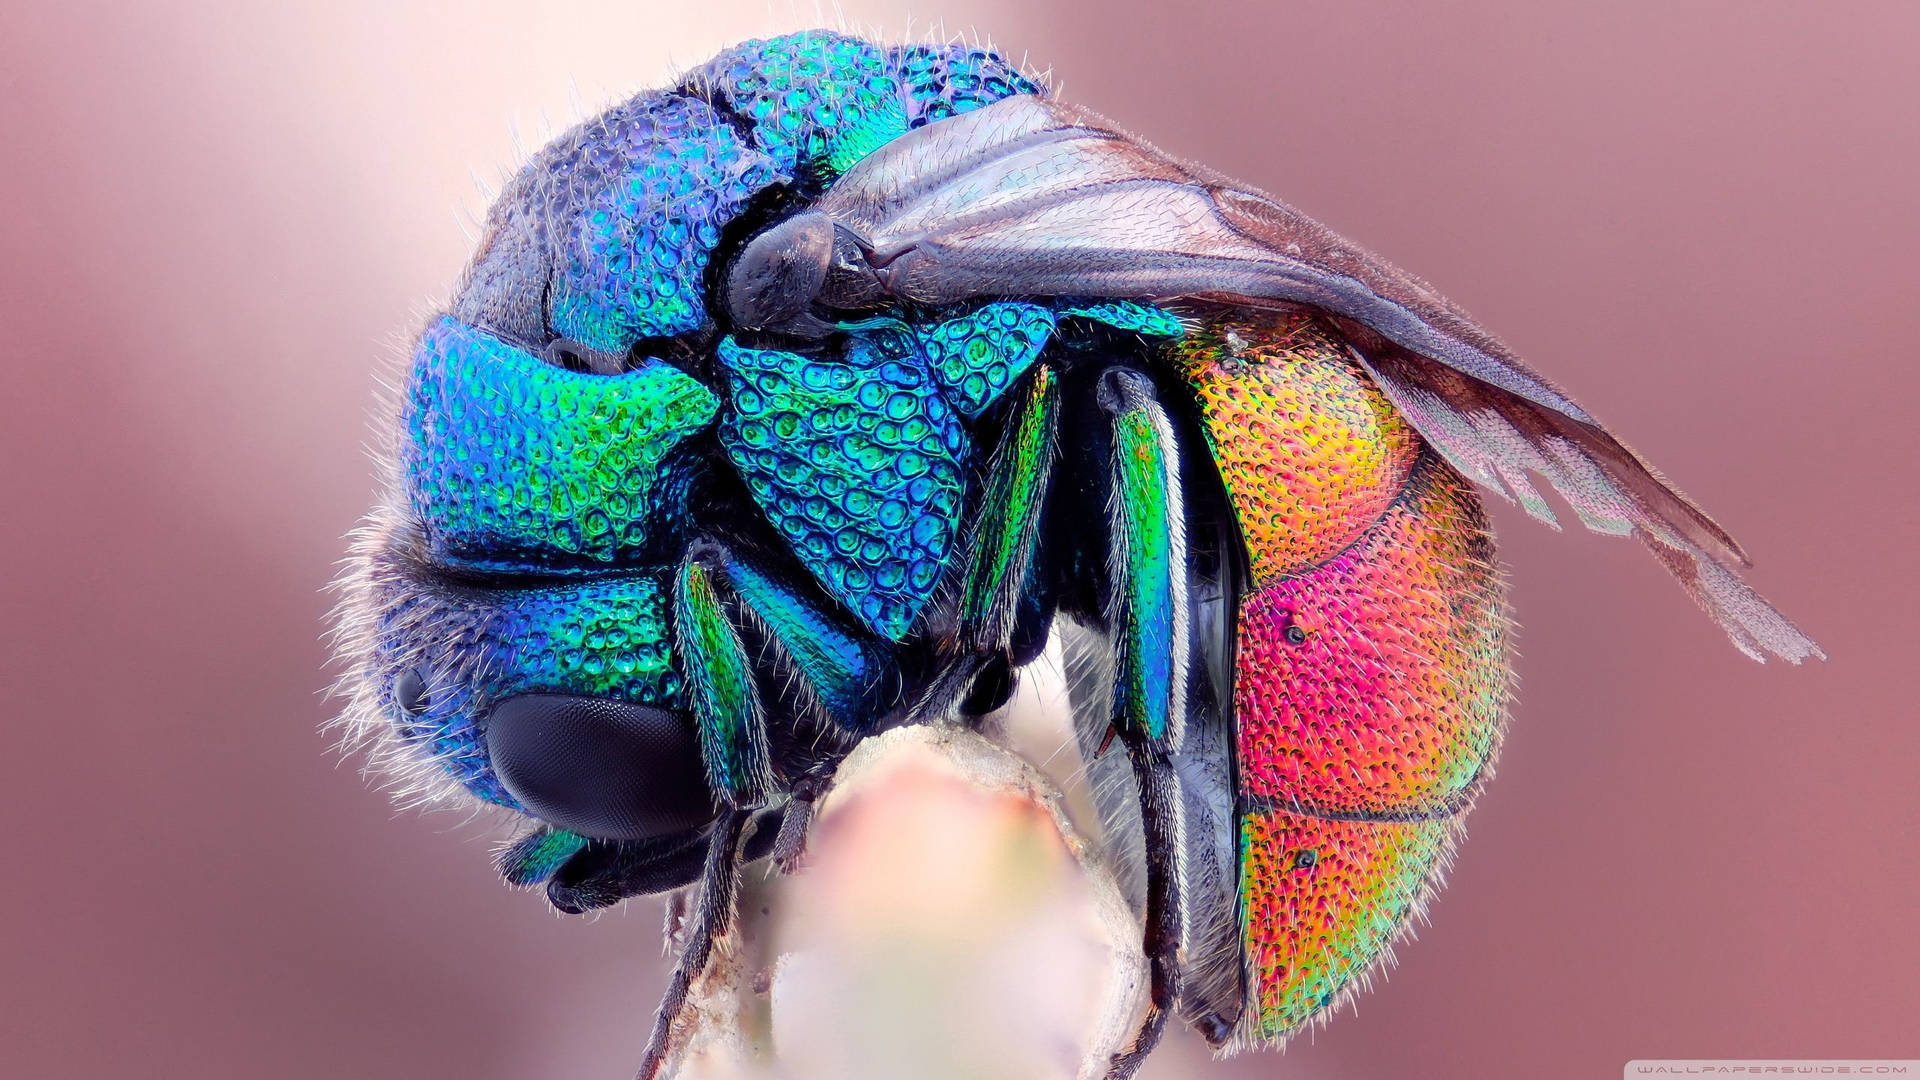 Insect With Iridescent Body